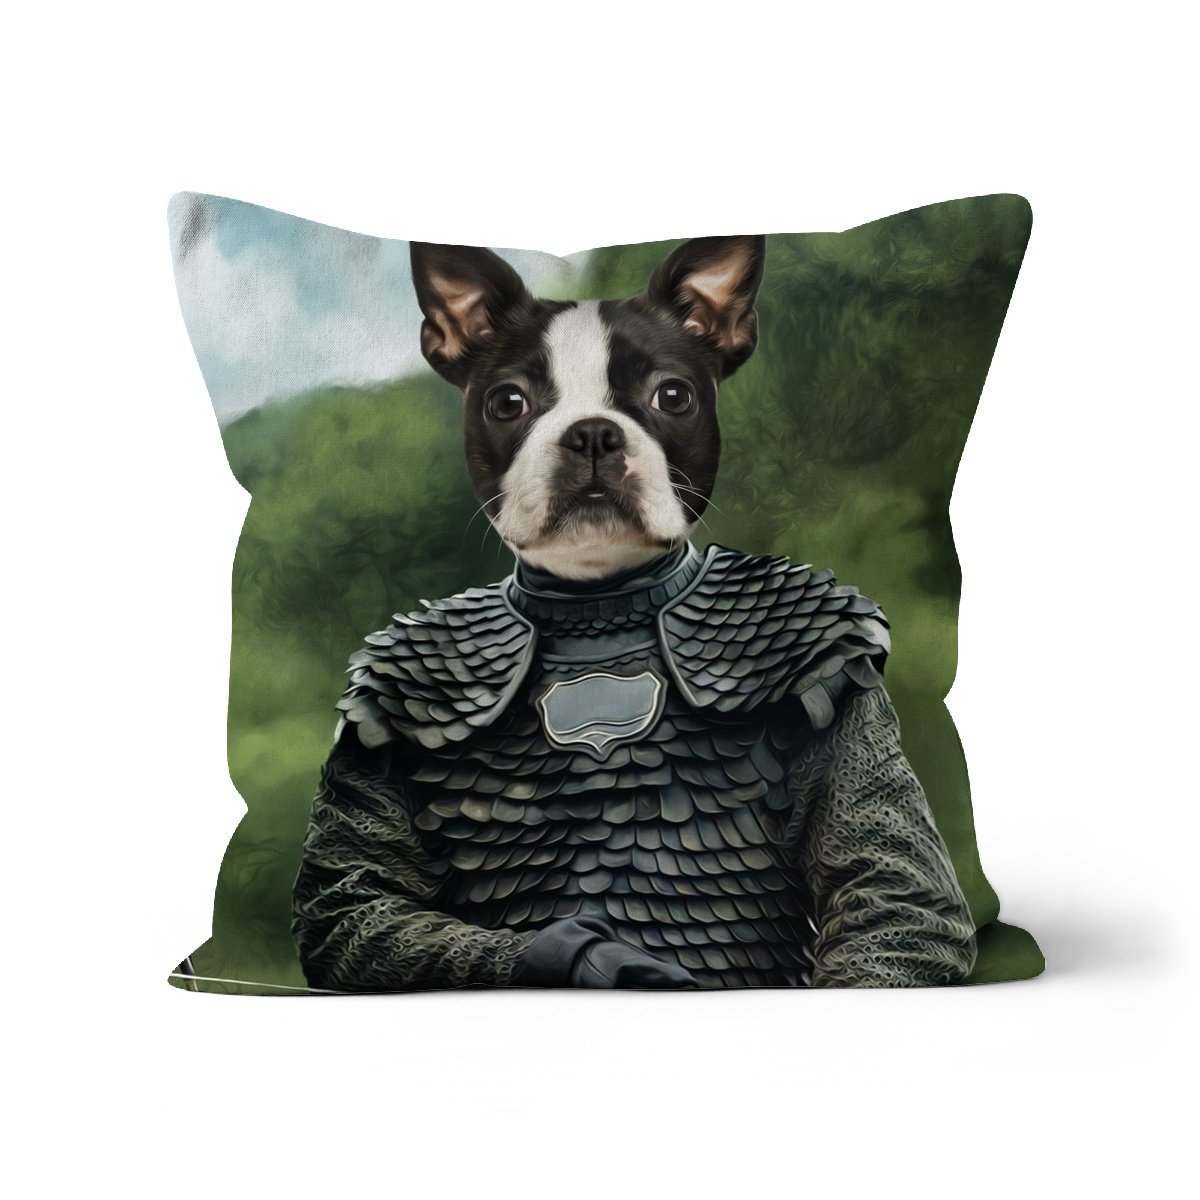 The Bowman (GOT Inspired): Custom Pet Throw Pillow - Paw & Glory - #pet portraits# - #dog portraits# - #pet portraits uk#paw and glory, custom pet portrait cushion,personalised cat pillow, dog shaped pillows, custom pillow cover, pillows with dogs picture, my pet pillow